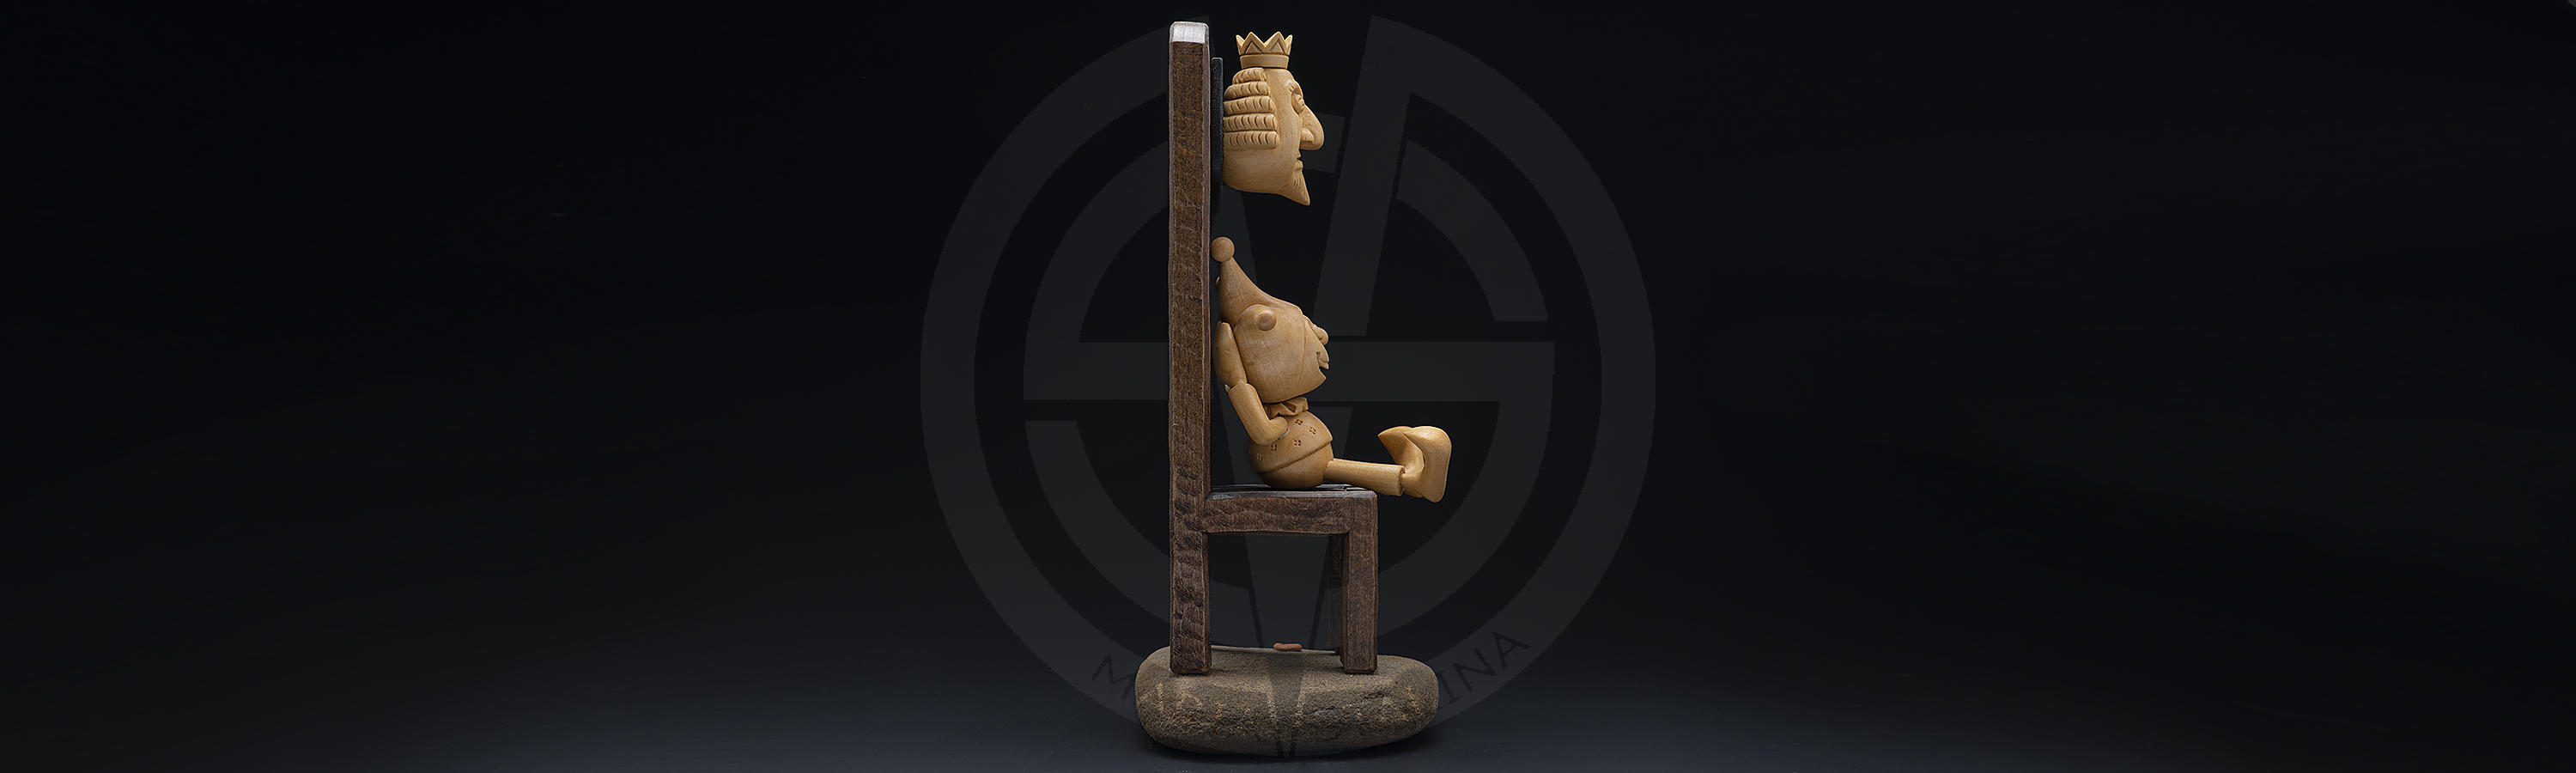 The King and the Jester handmade statuette from natural materials